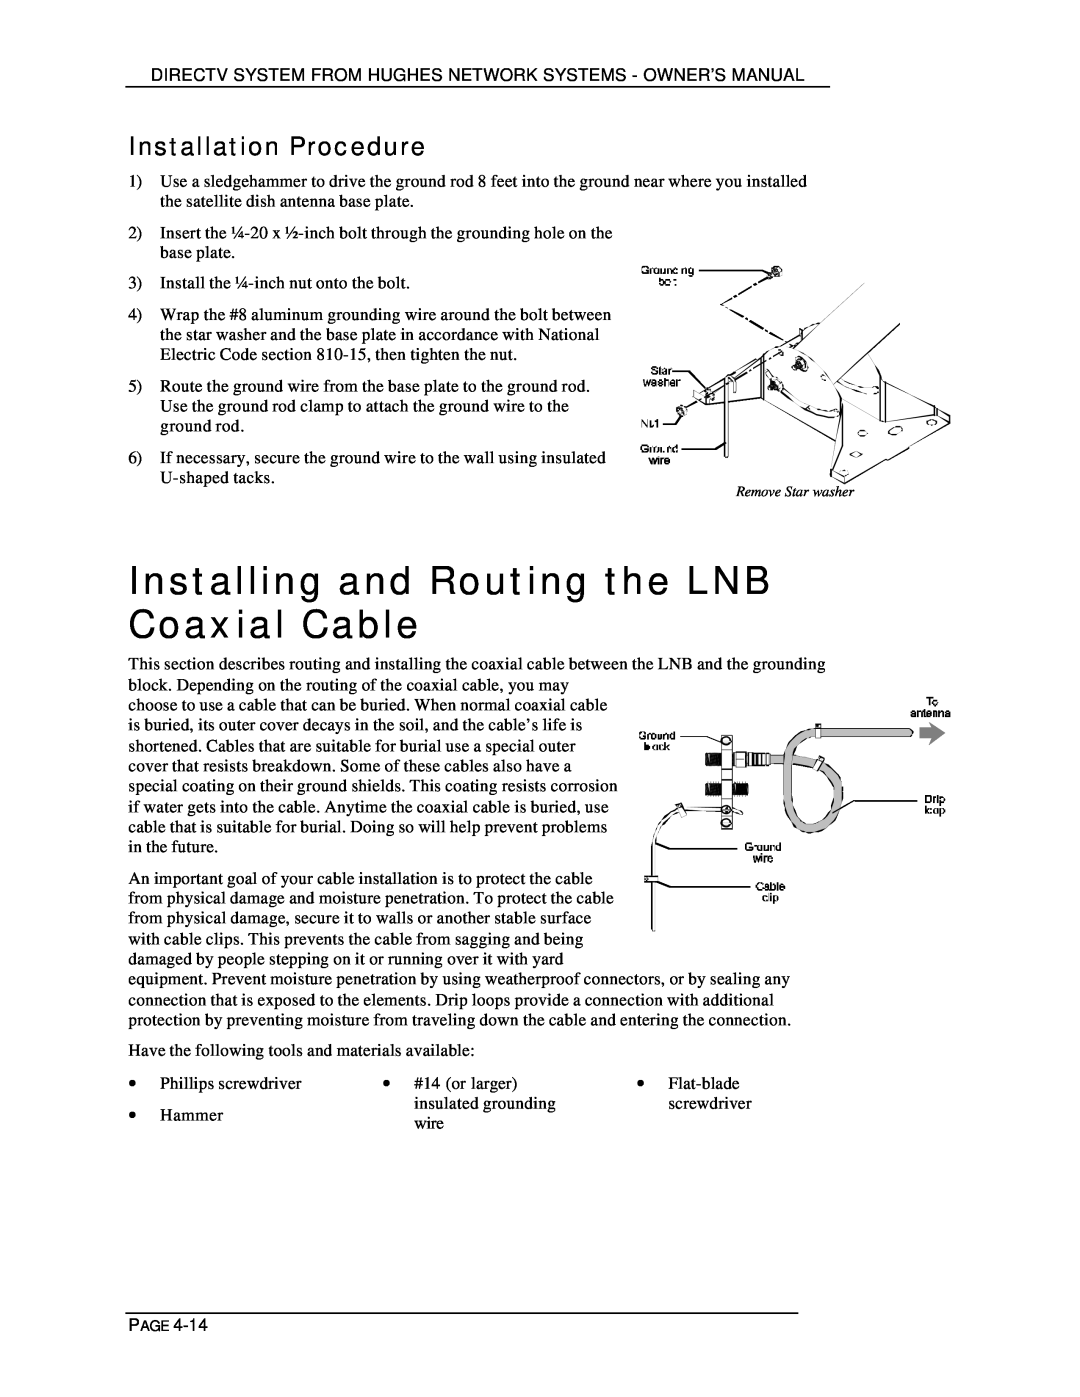 DirecTV HIRD-D01, HIRD-D11 owner manual Installing and Routing the LNB Coaxial Cable, Installation Procedure 